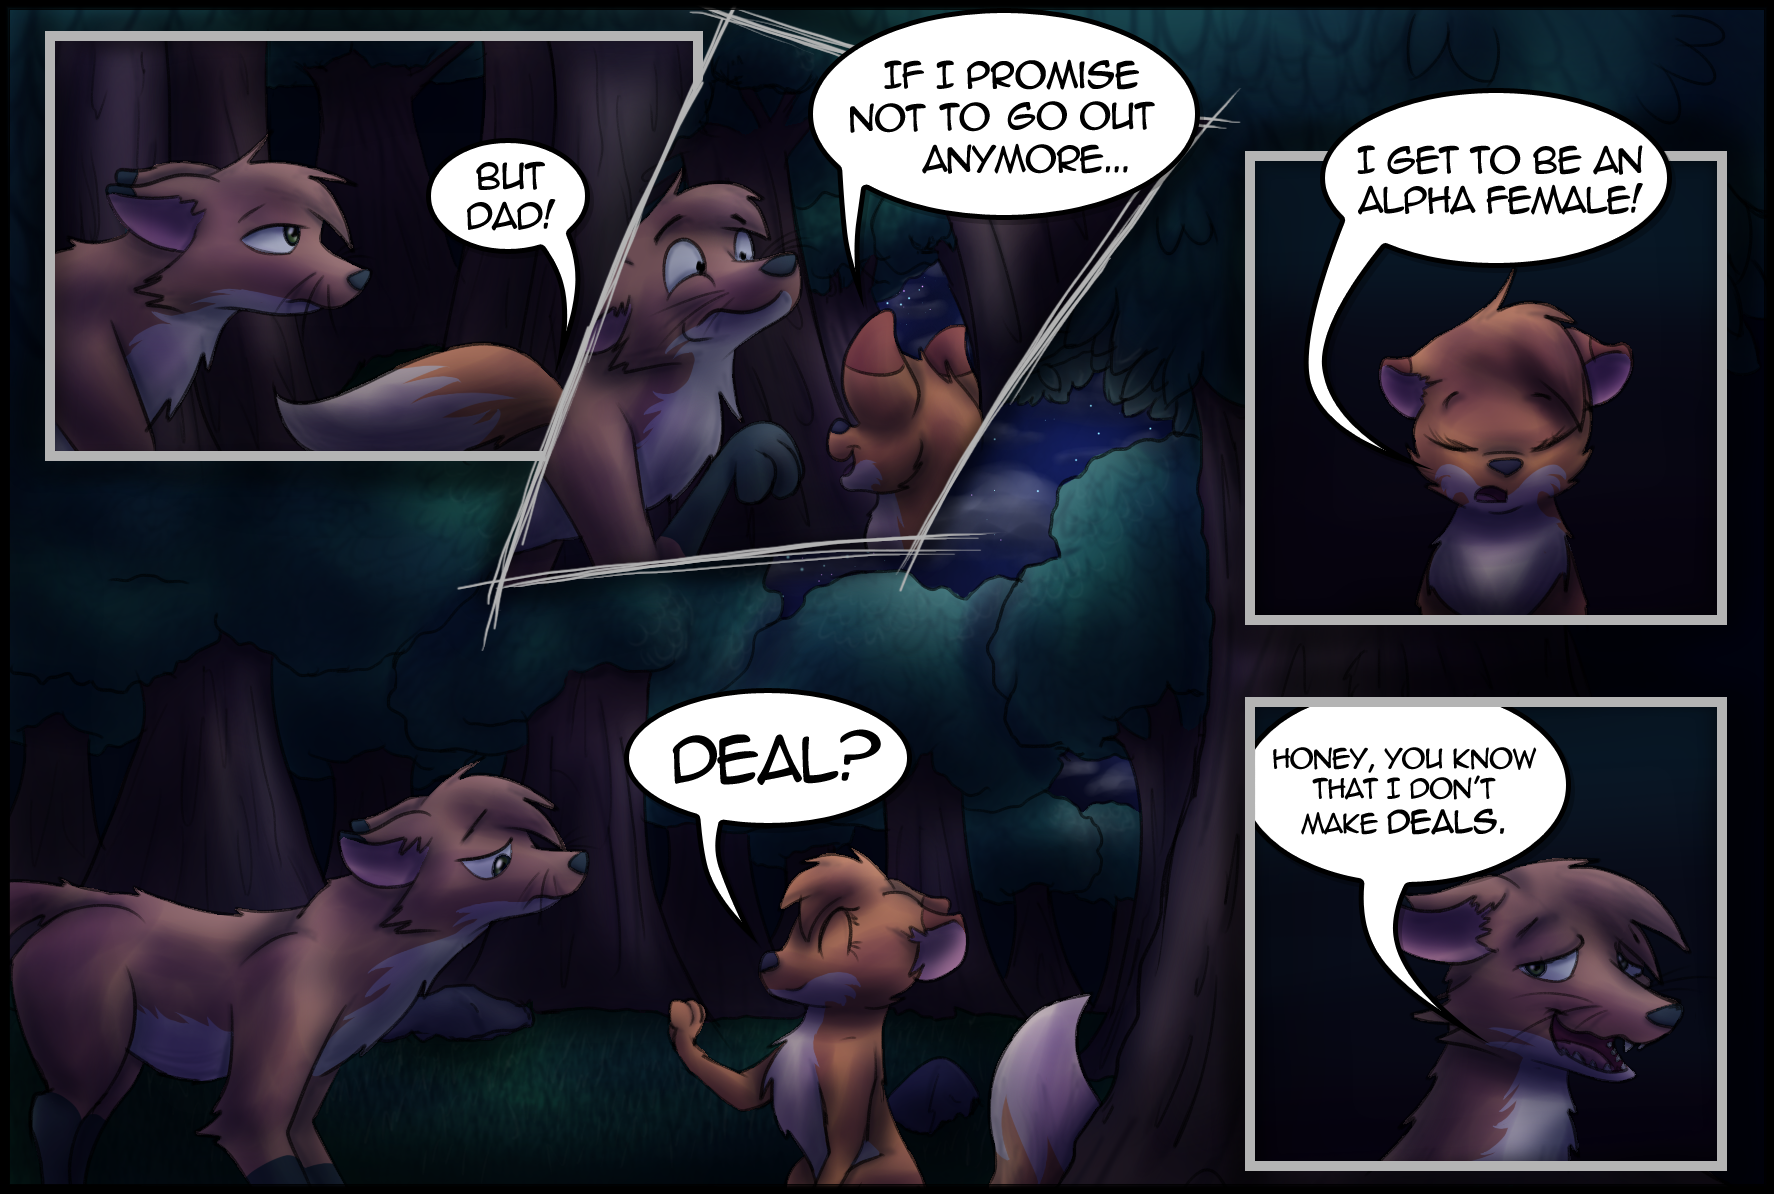 Ch 1 Page 3 – Deal?